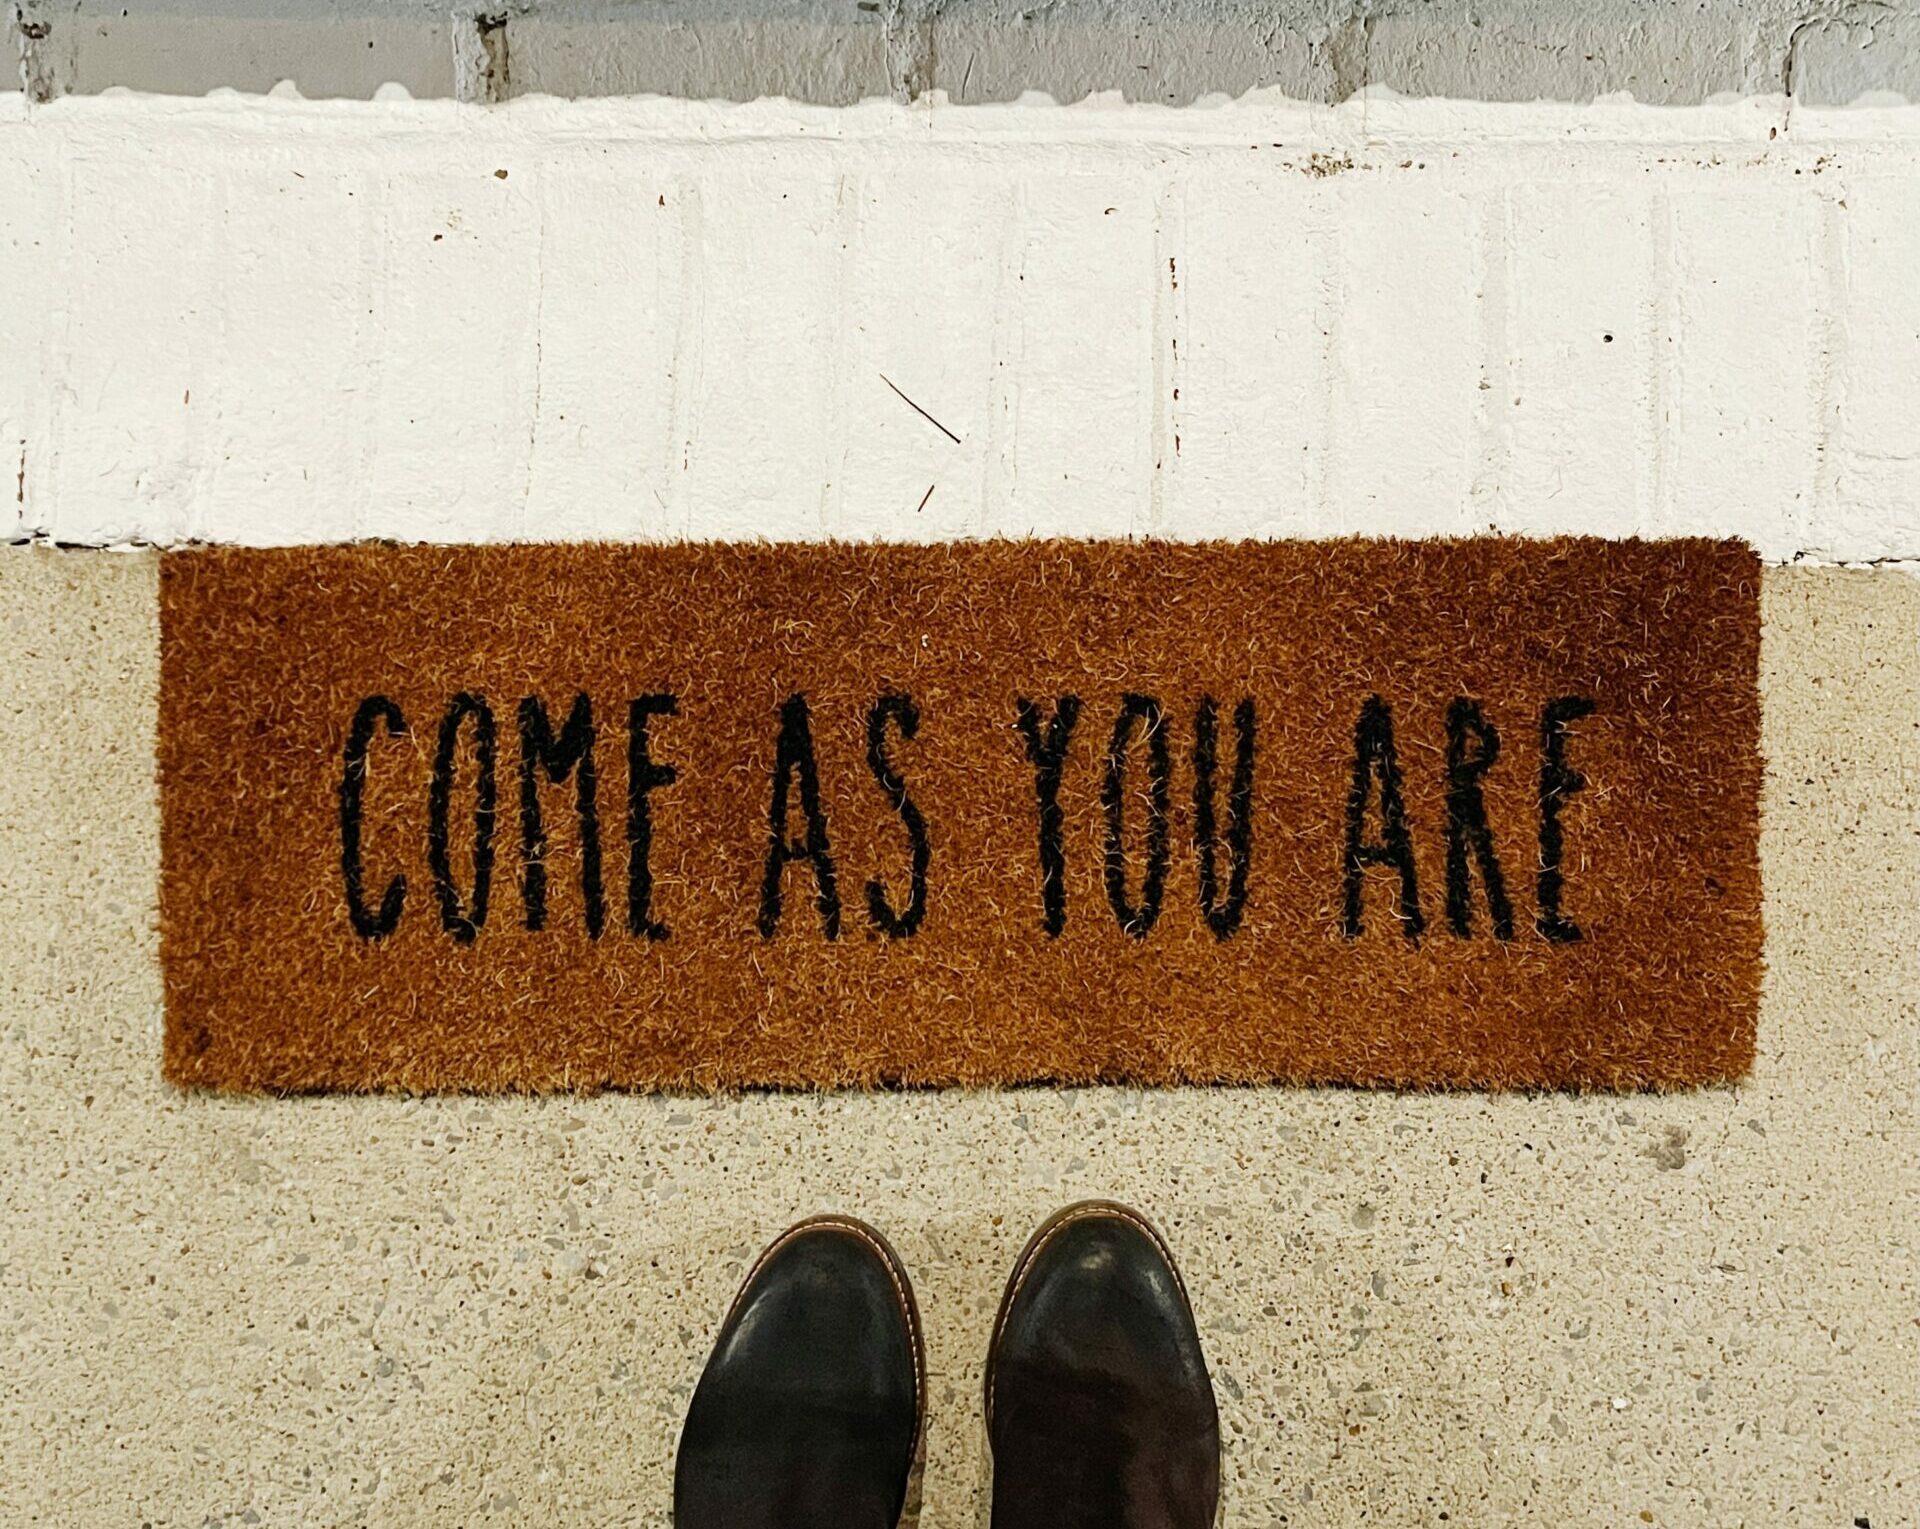 It’s time to roll out the welcome mat